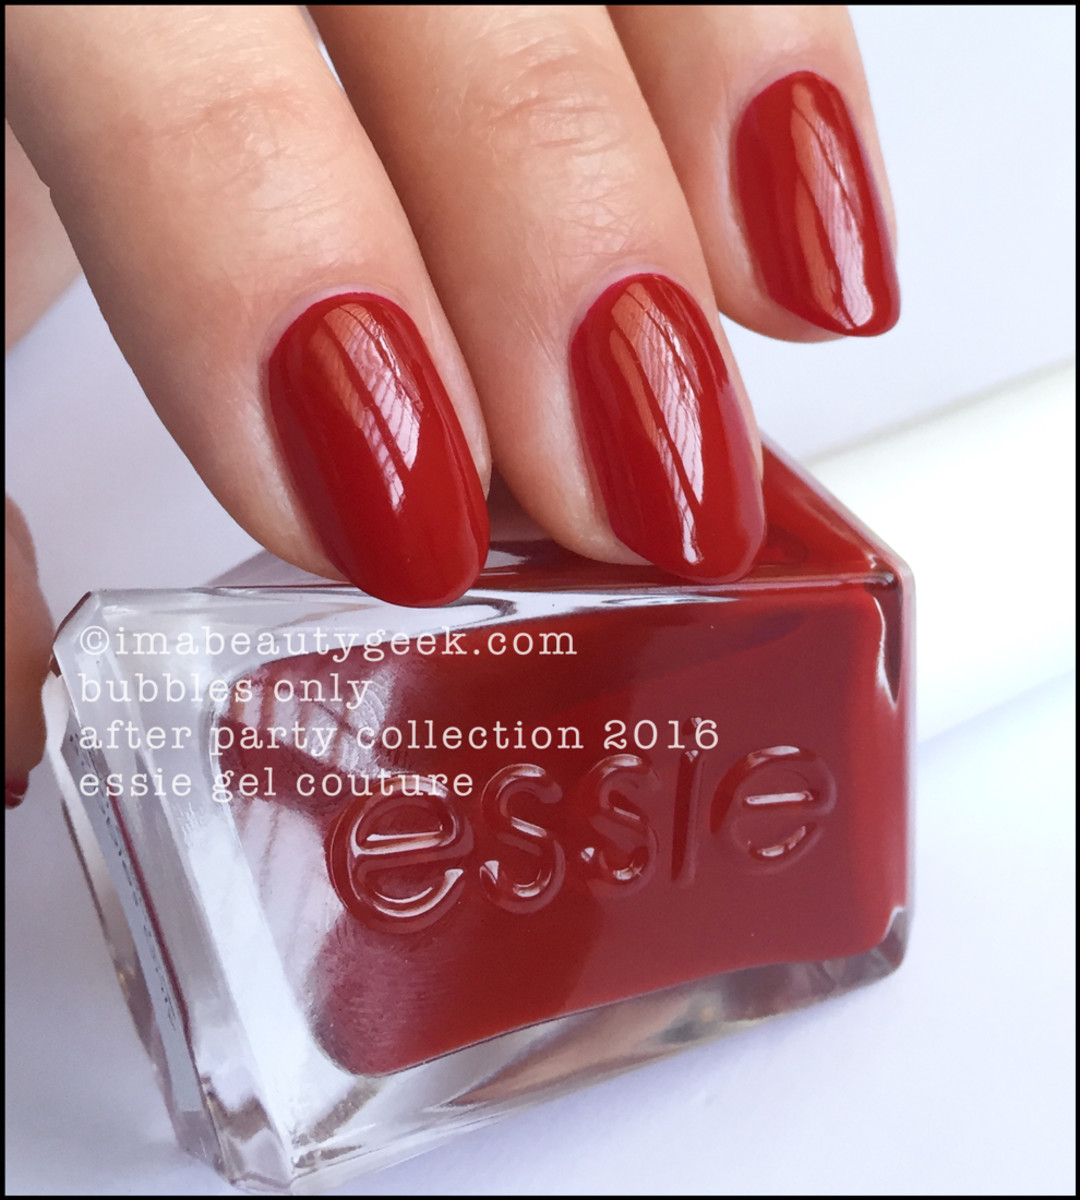 Essie Bubbles Only_Essie Gel Couture Swatches Review 2016